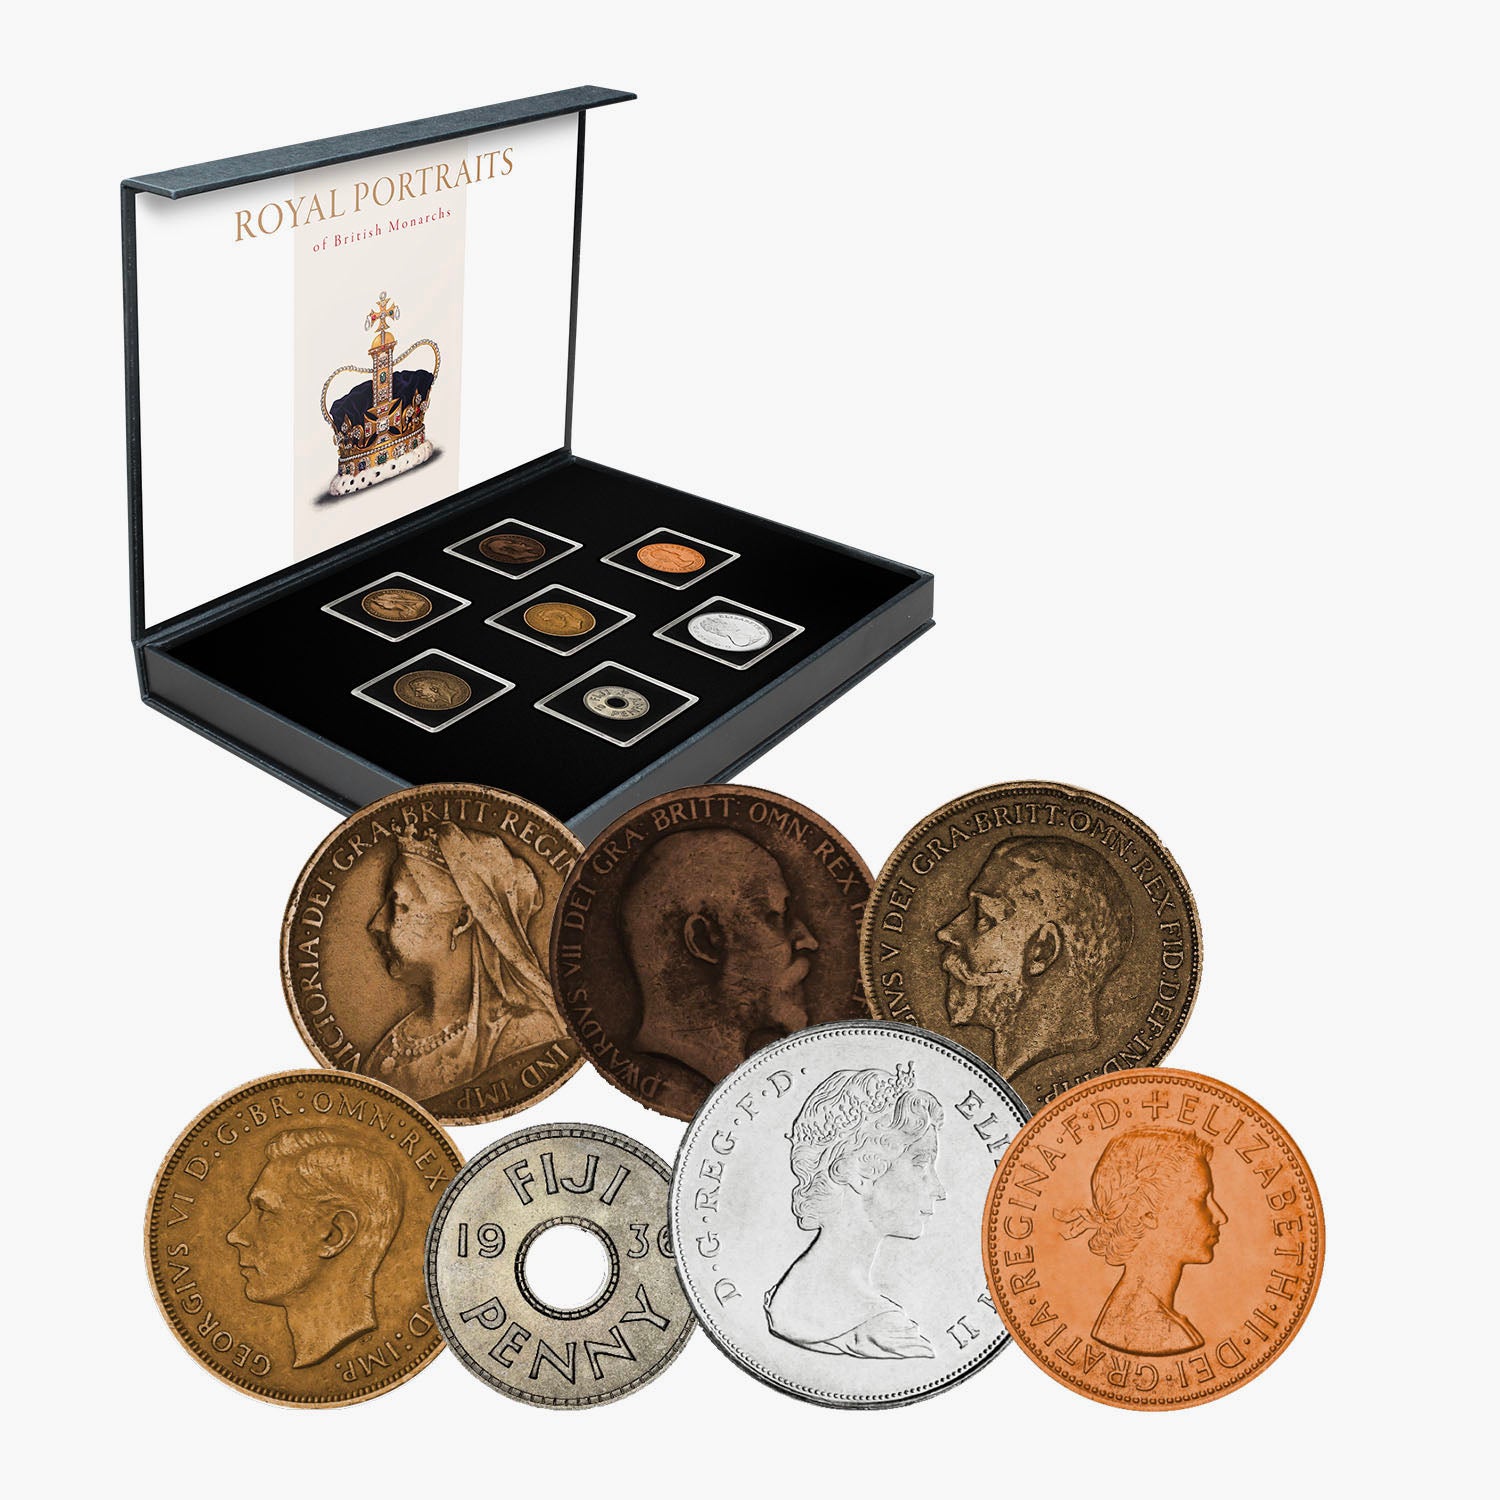 Royal Portraits of British Monarchs Coin Collection